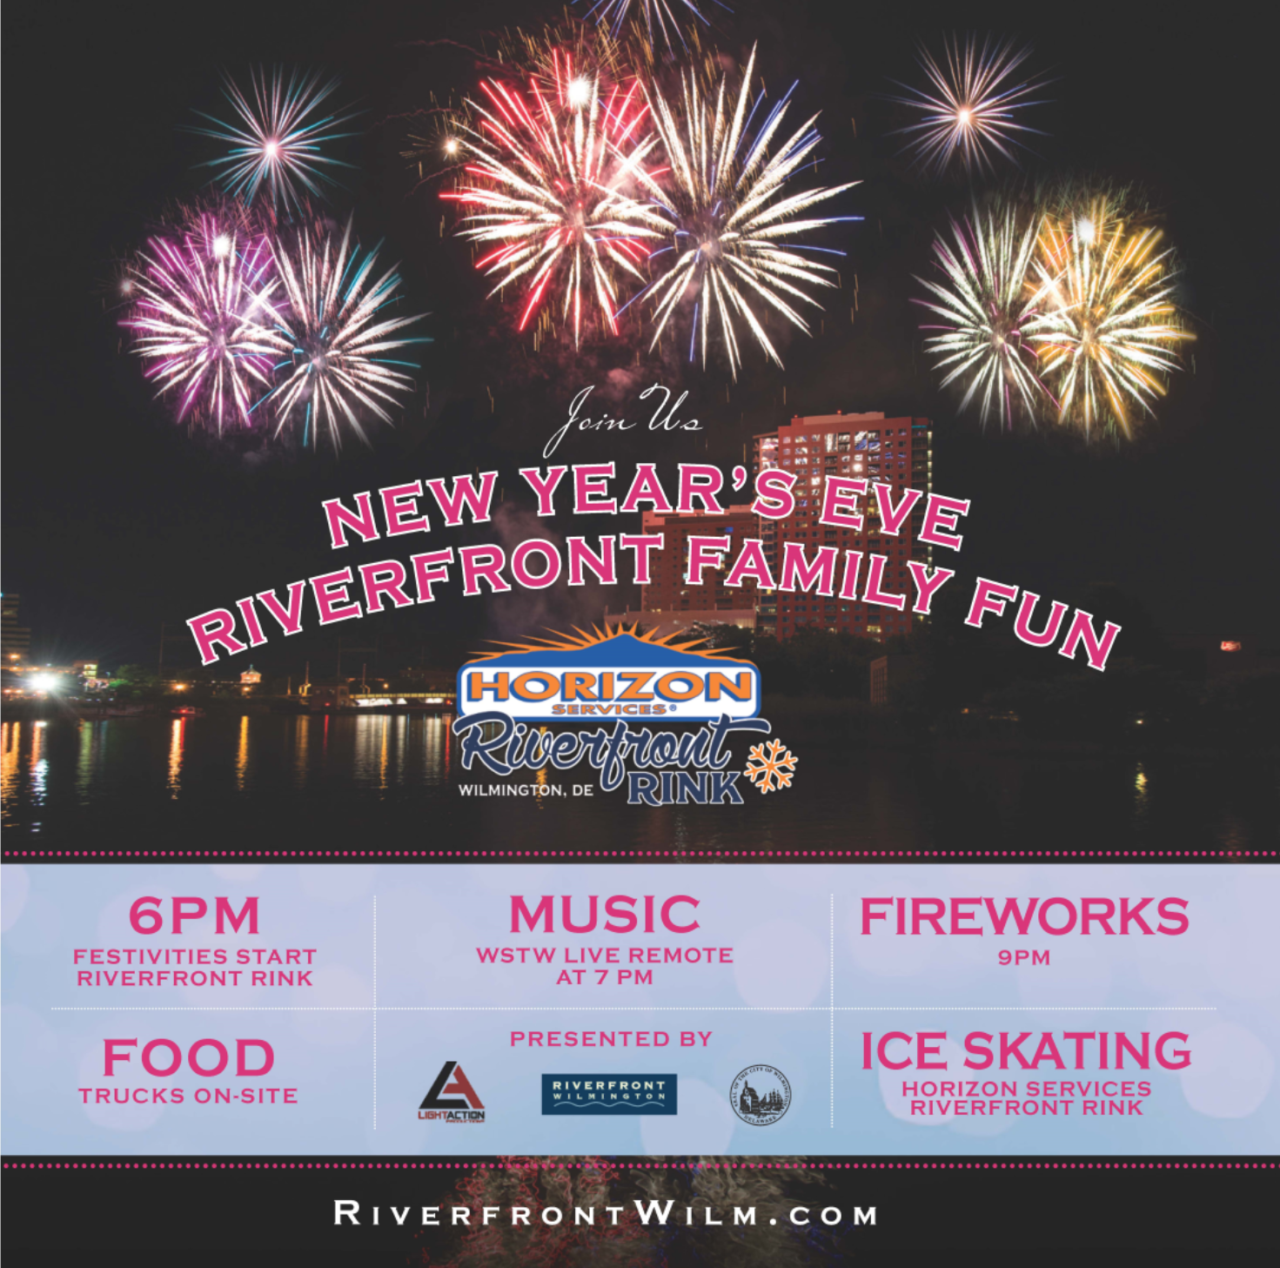 New Year’s Eve Riverfront Family Fun - Riverfront Wilmington